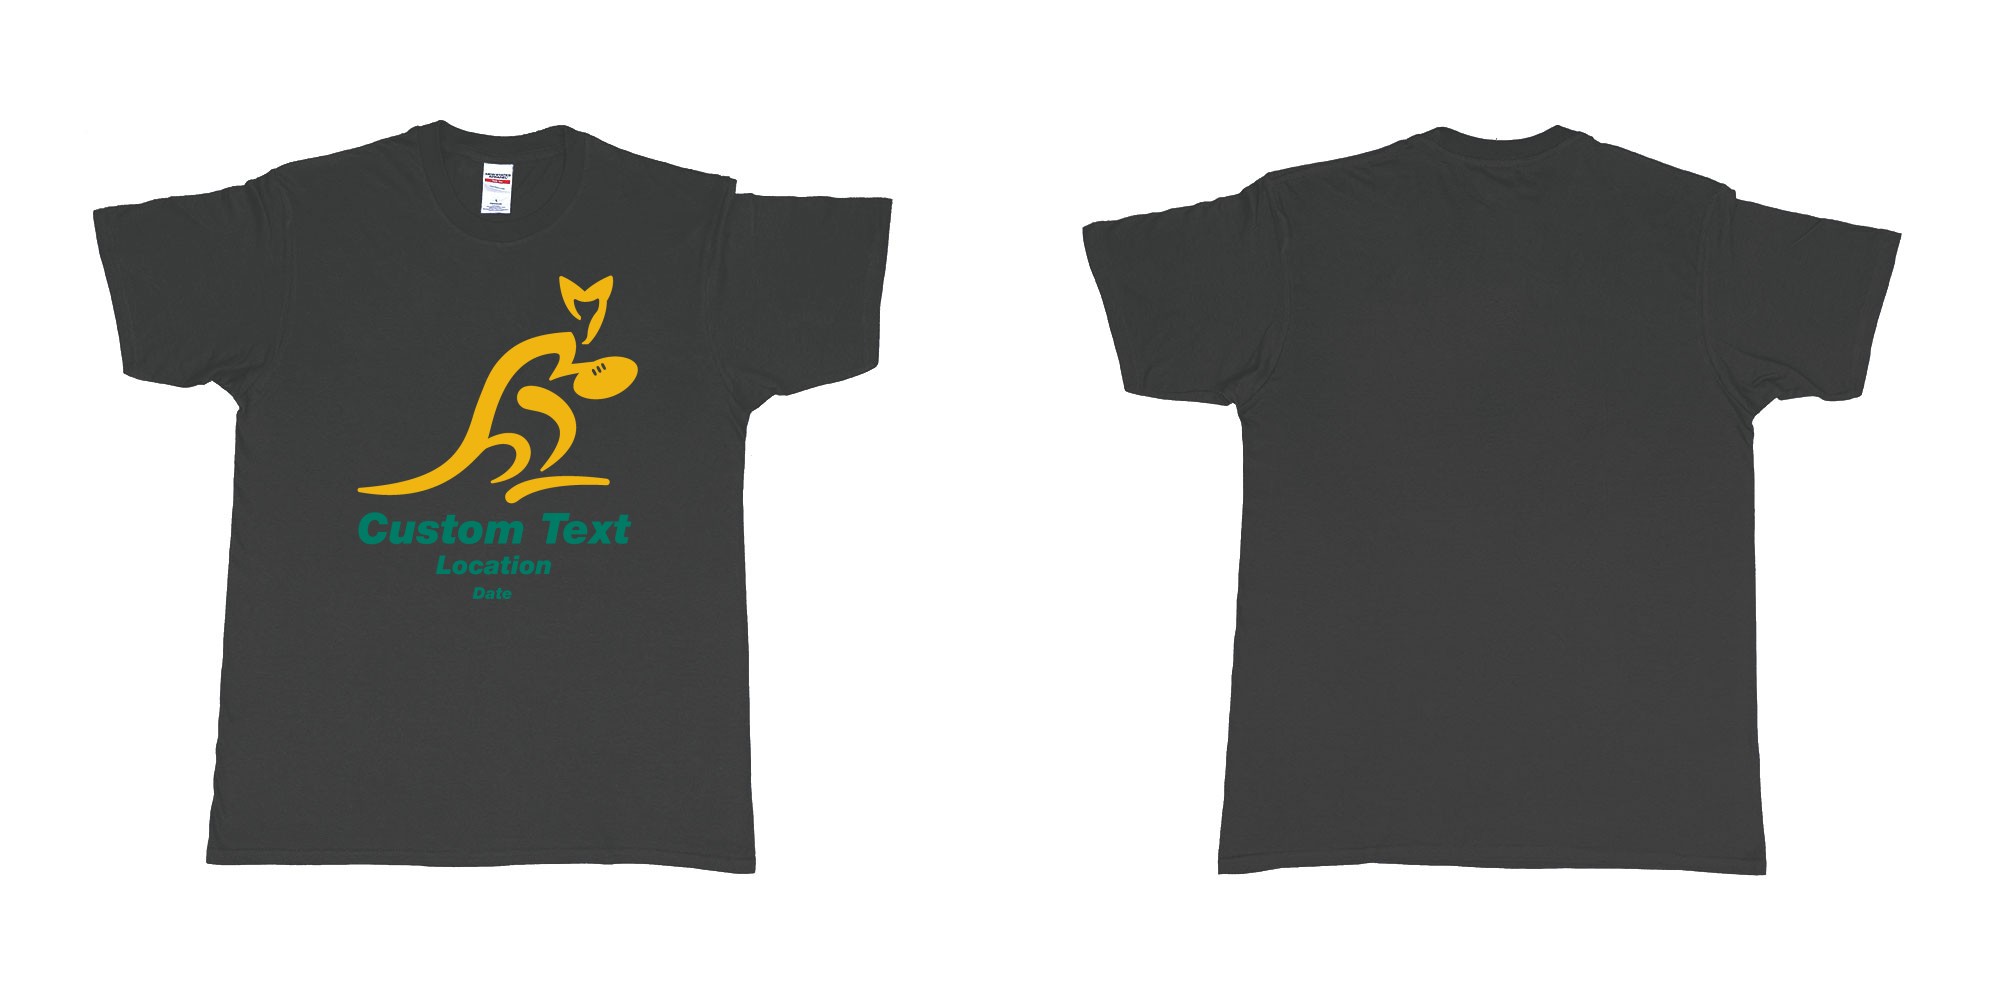 Custom tshirt design australia national rugby union team the wallabies in fabric color black choice your own text made in Bali by The Pirate Way